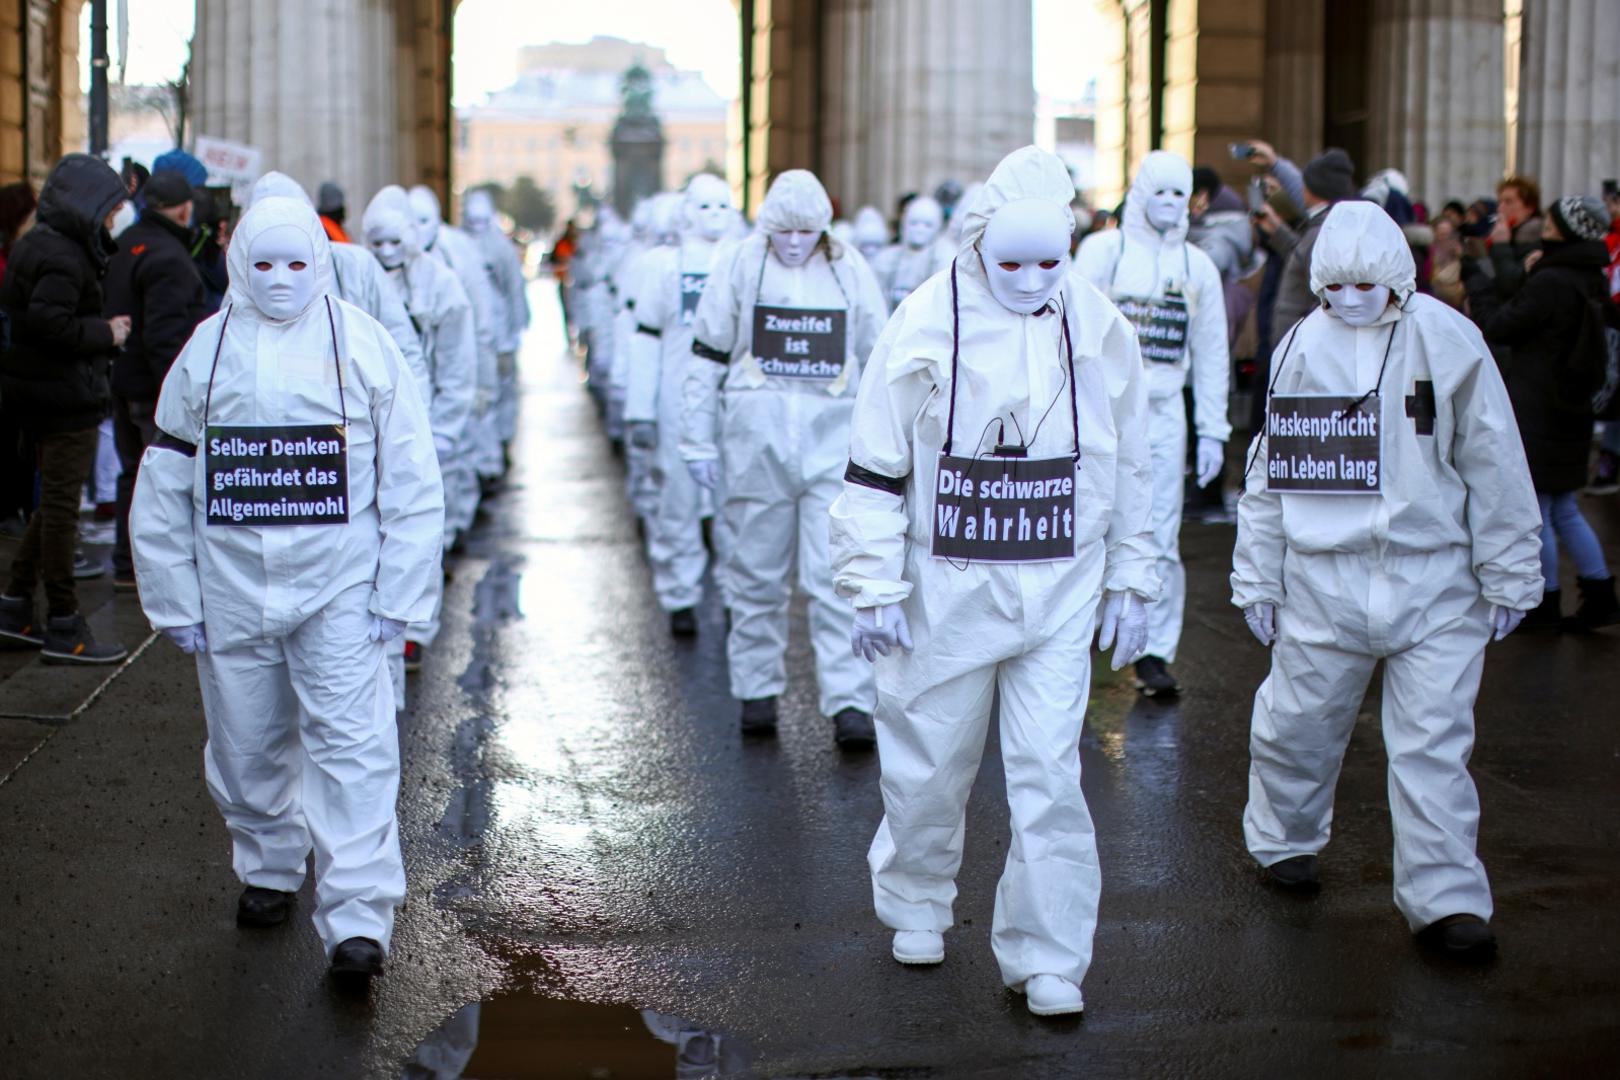 Demonstration against the COVID-19 measures and their economic consequences, in Vienna Protesters in white suits and wearing masks attend a demonstration against the coronavirus disease (COVID-19) measures and their economic consequences in Vienna, Austria, January 16, 2021. REUTERS/Lisi Niesner LISI NIESNER